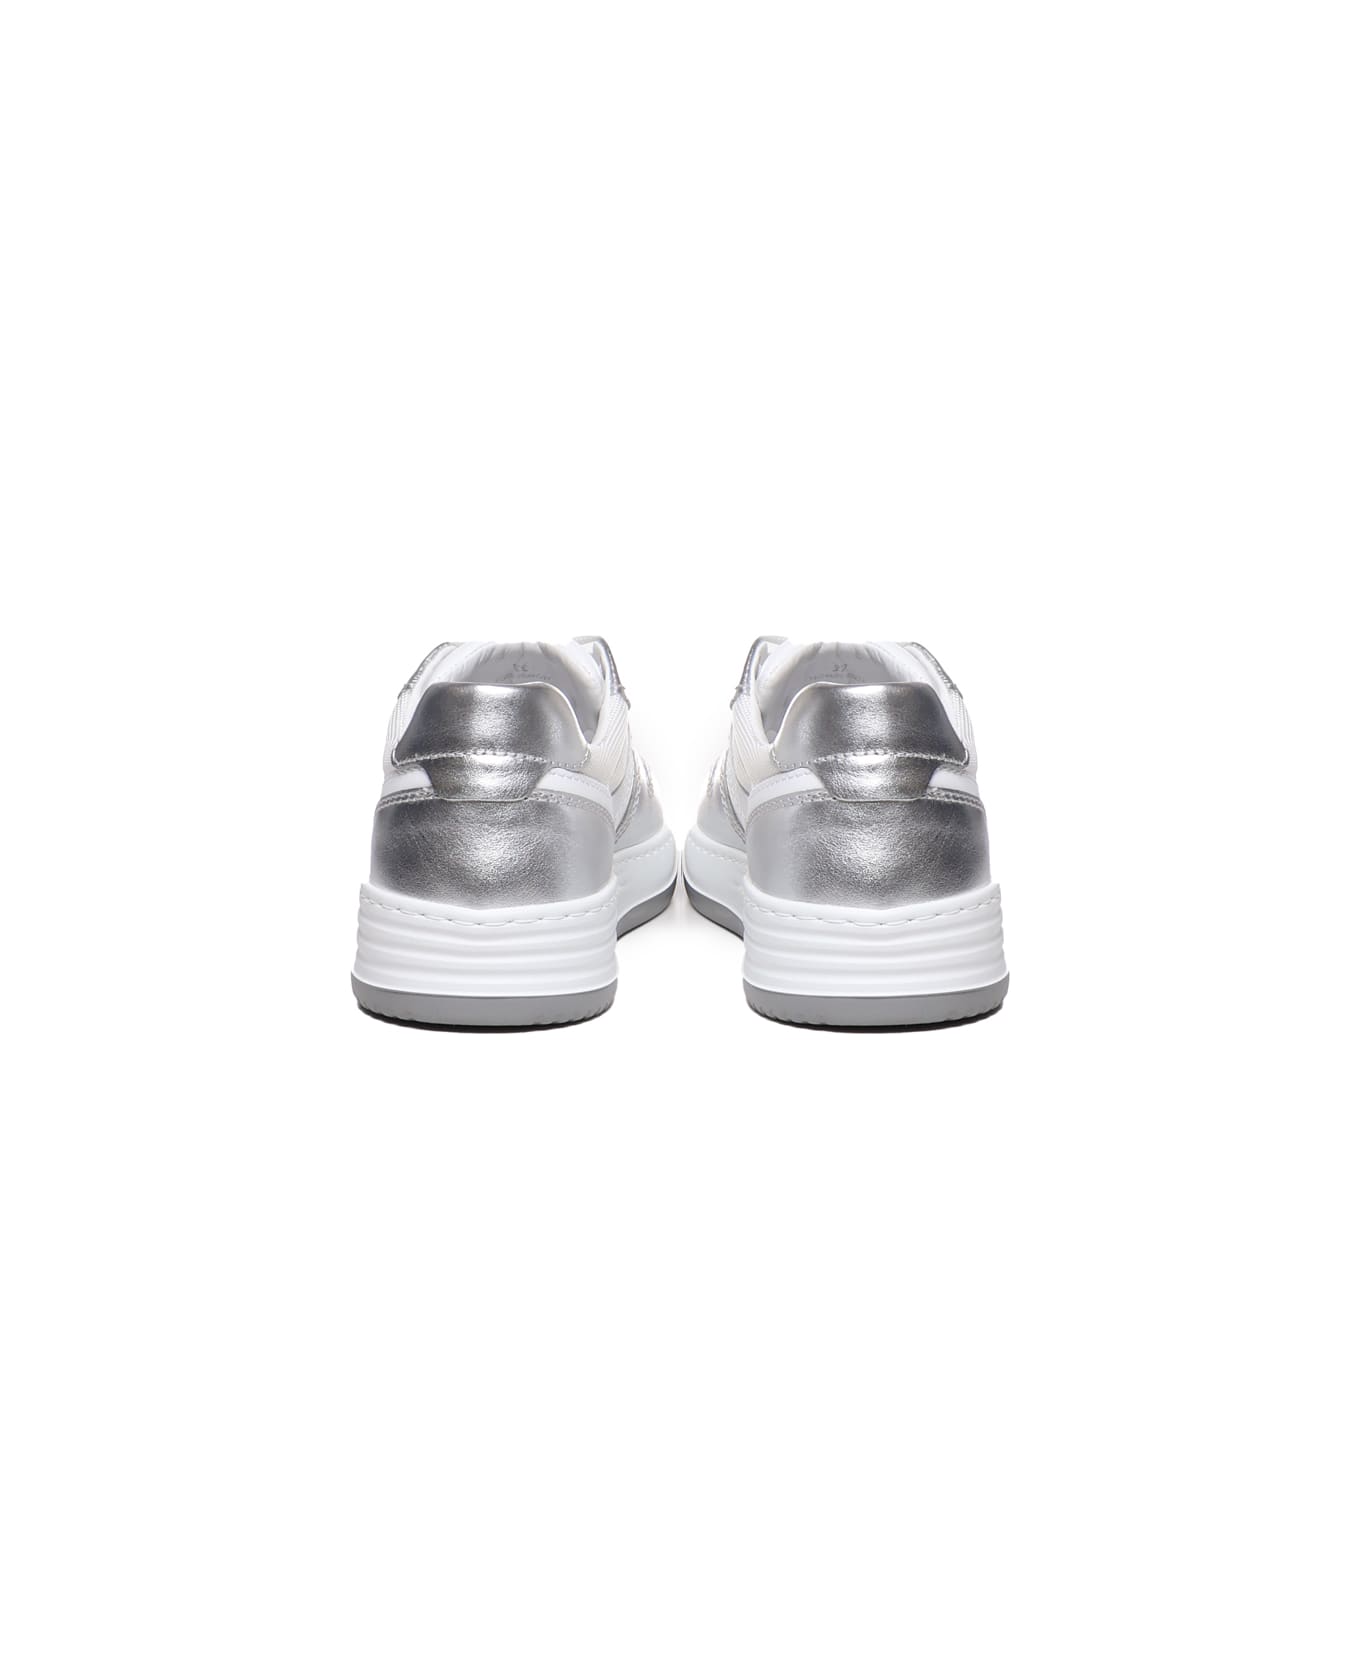 Hogan 630 Sneakers With Metallic Inserts - White, silver スニーカー